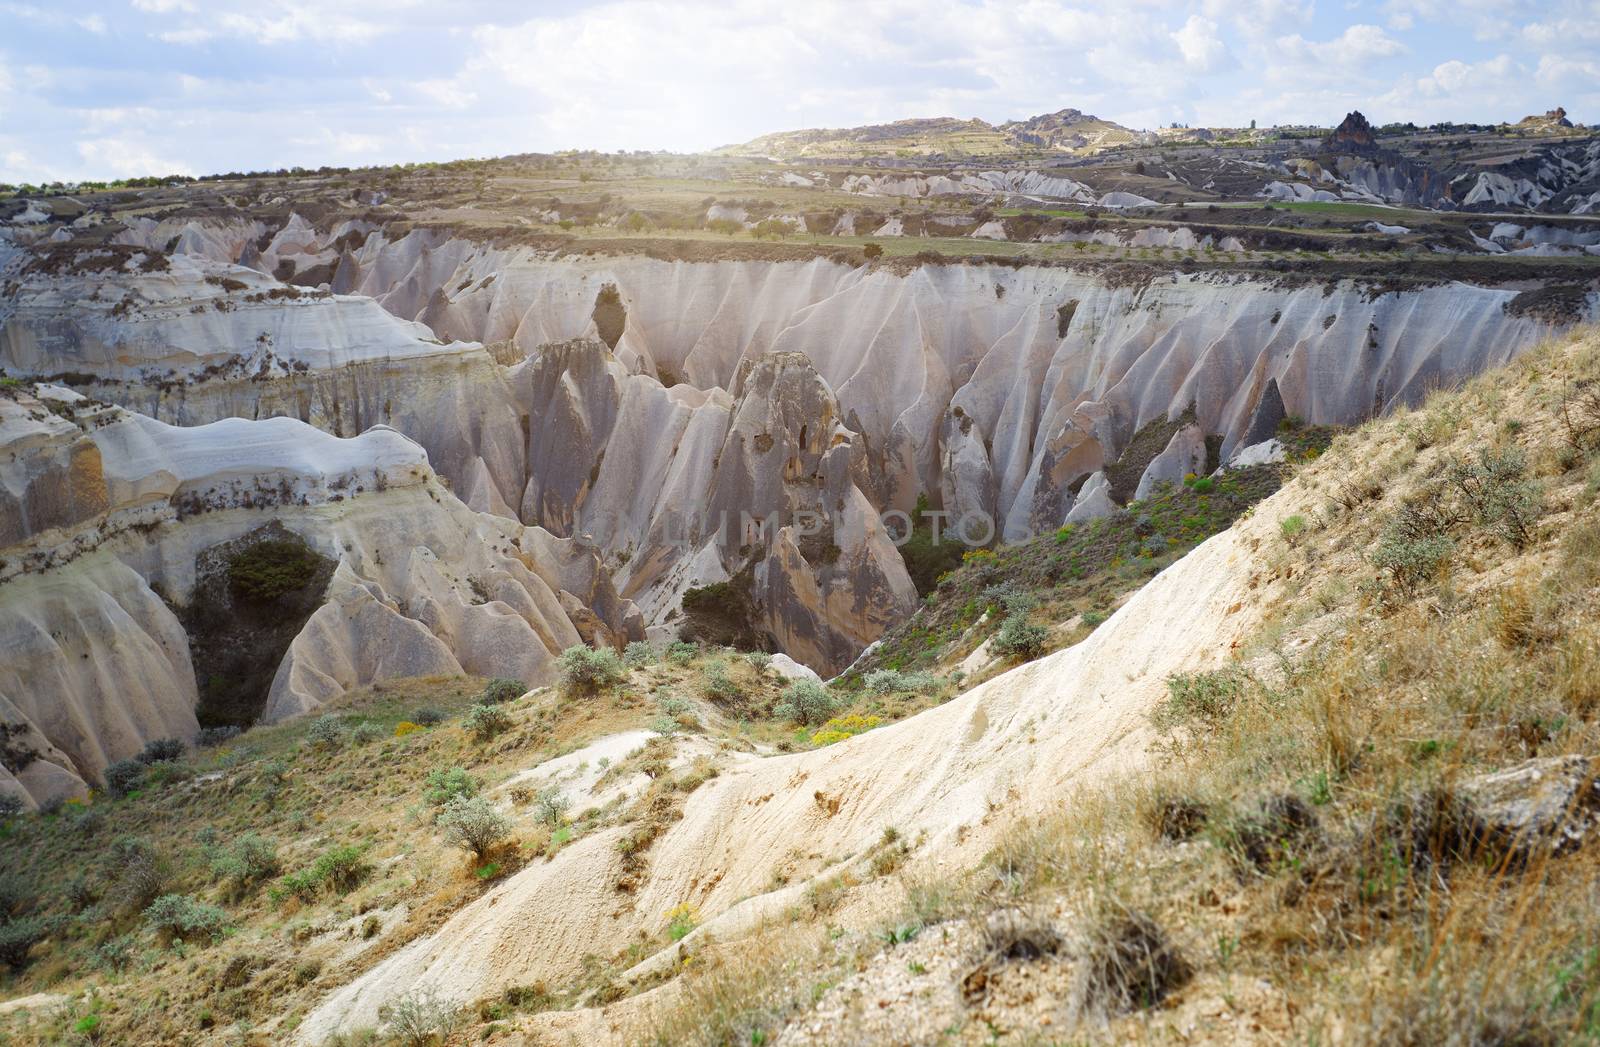 Limestone and tuff rock formations in Cappadocia, by Novic